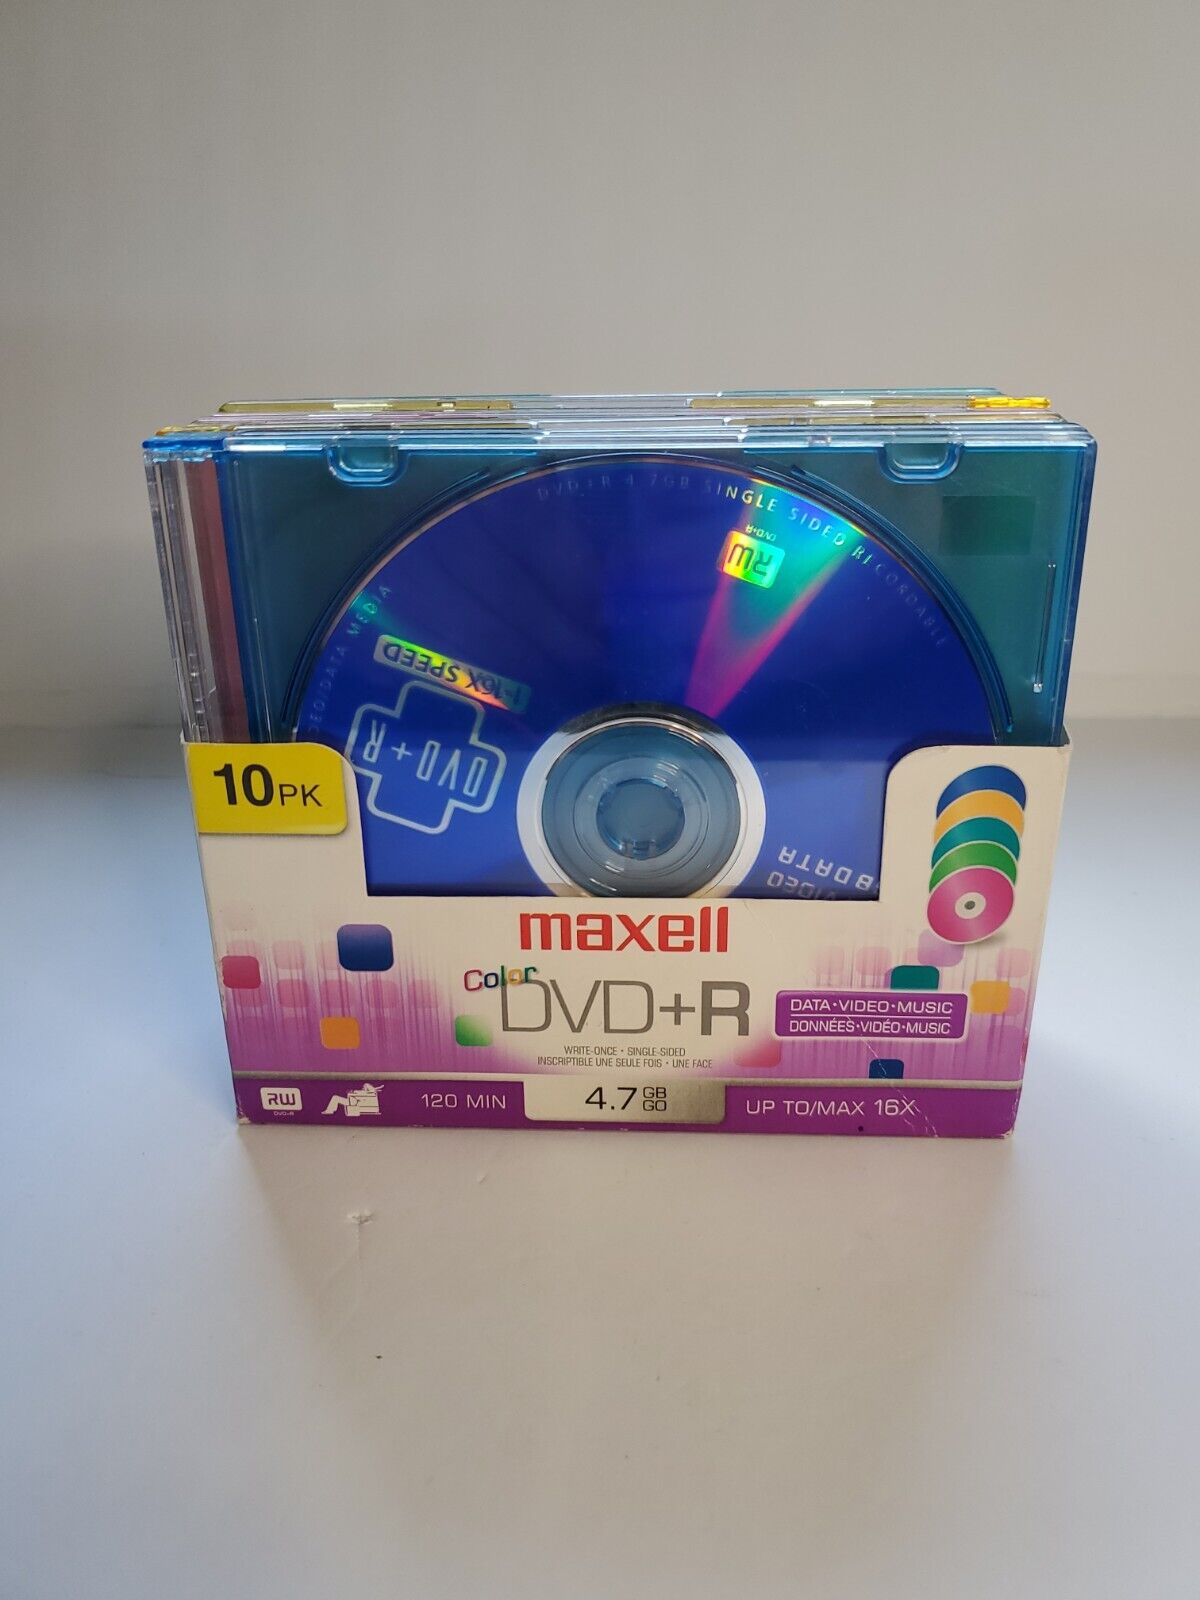 MAXELL COLOR DVD-R 10 PACK 4.7GB 120 MIN BRAND NEW IN OPEN PACKAGE 